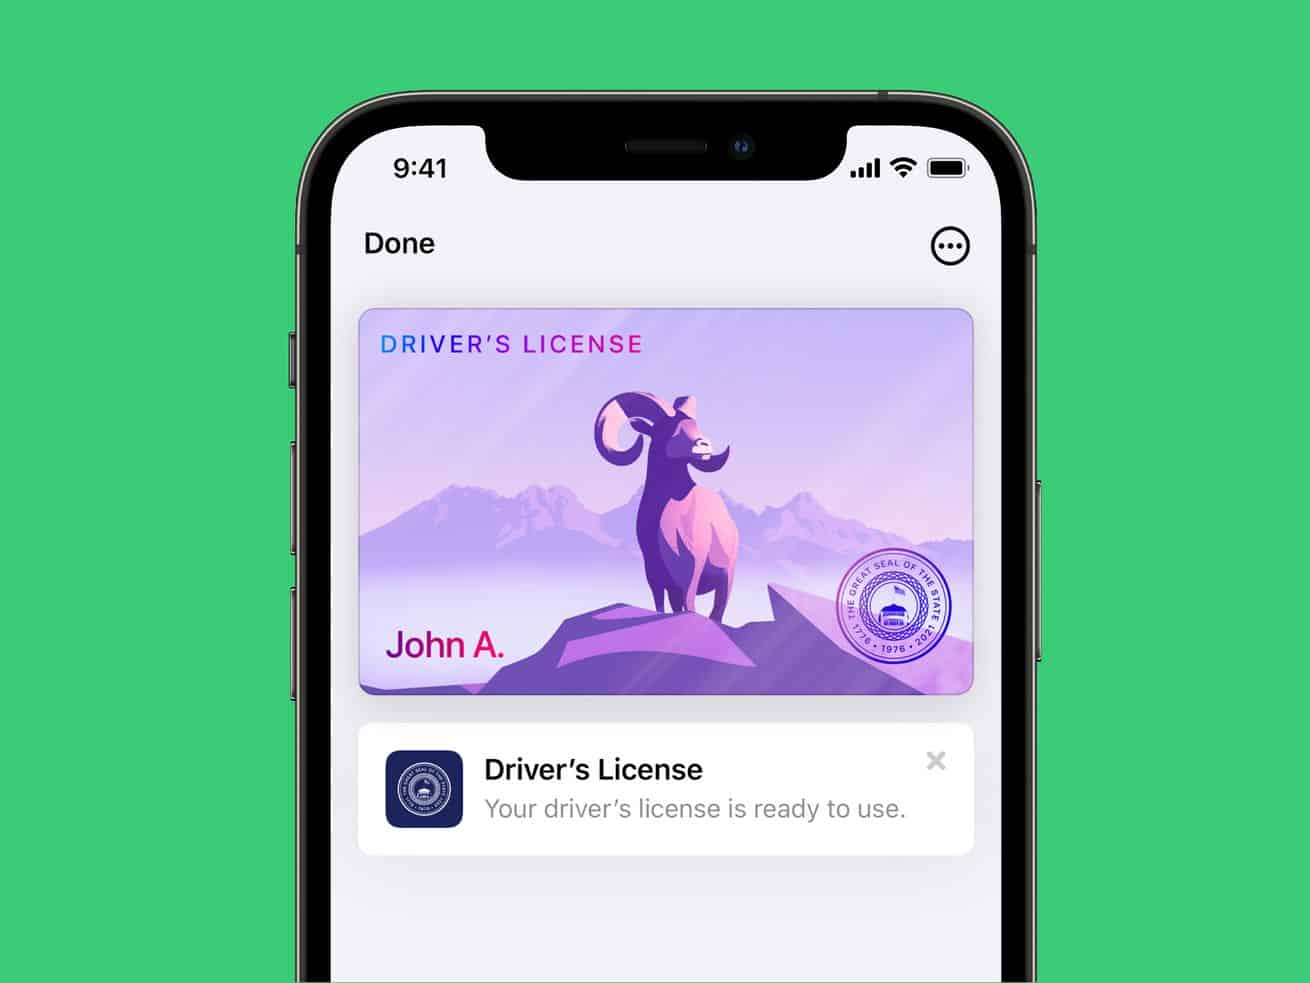 Digital driver’s licenses are coming